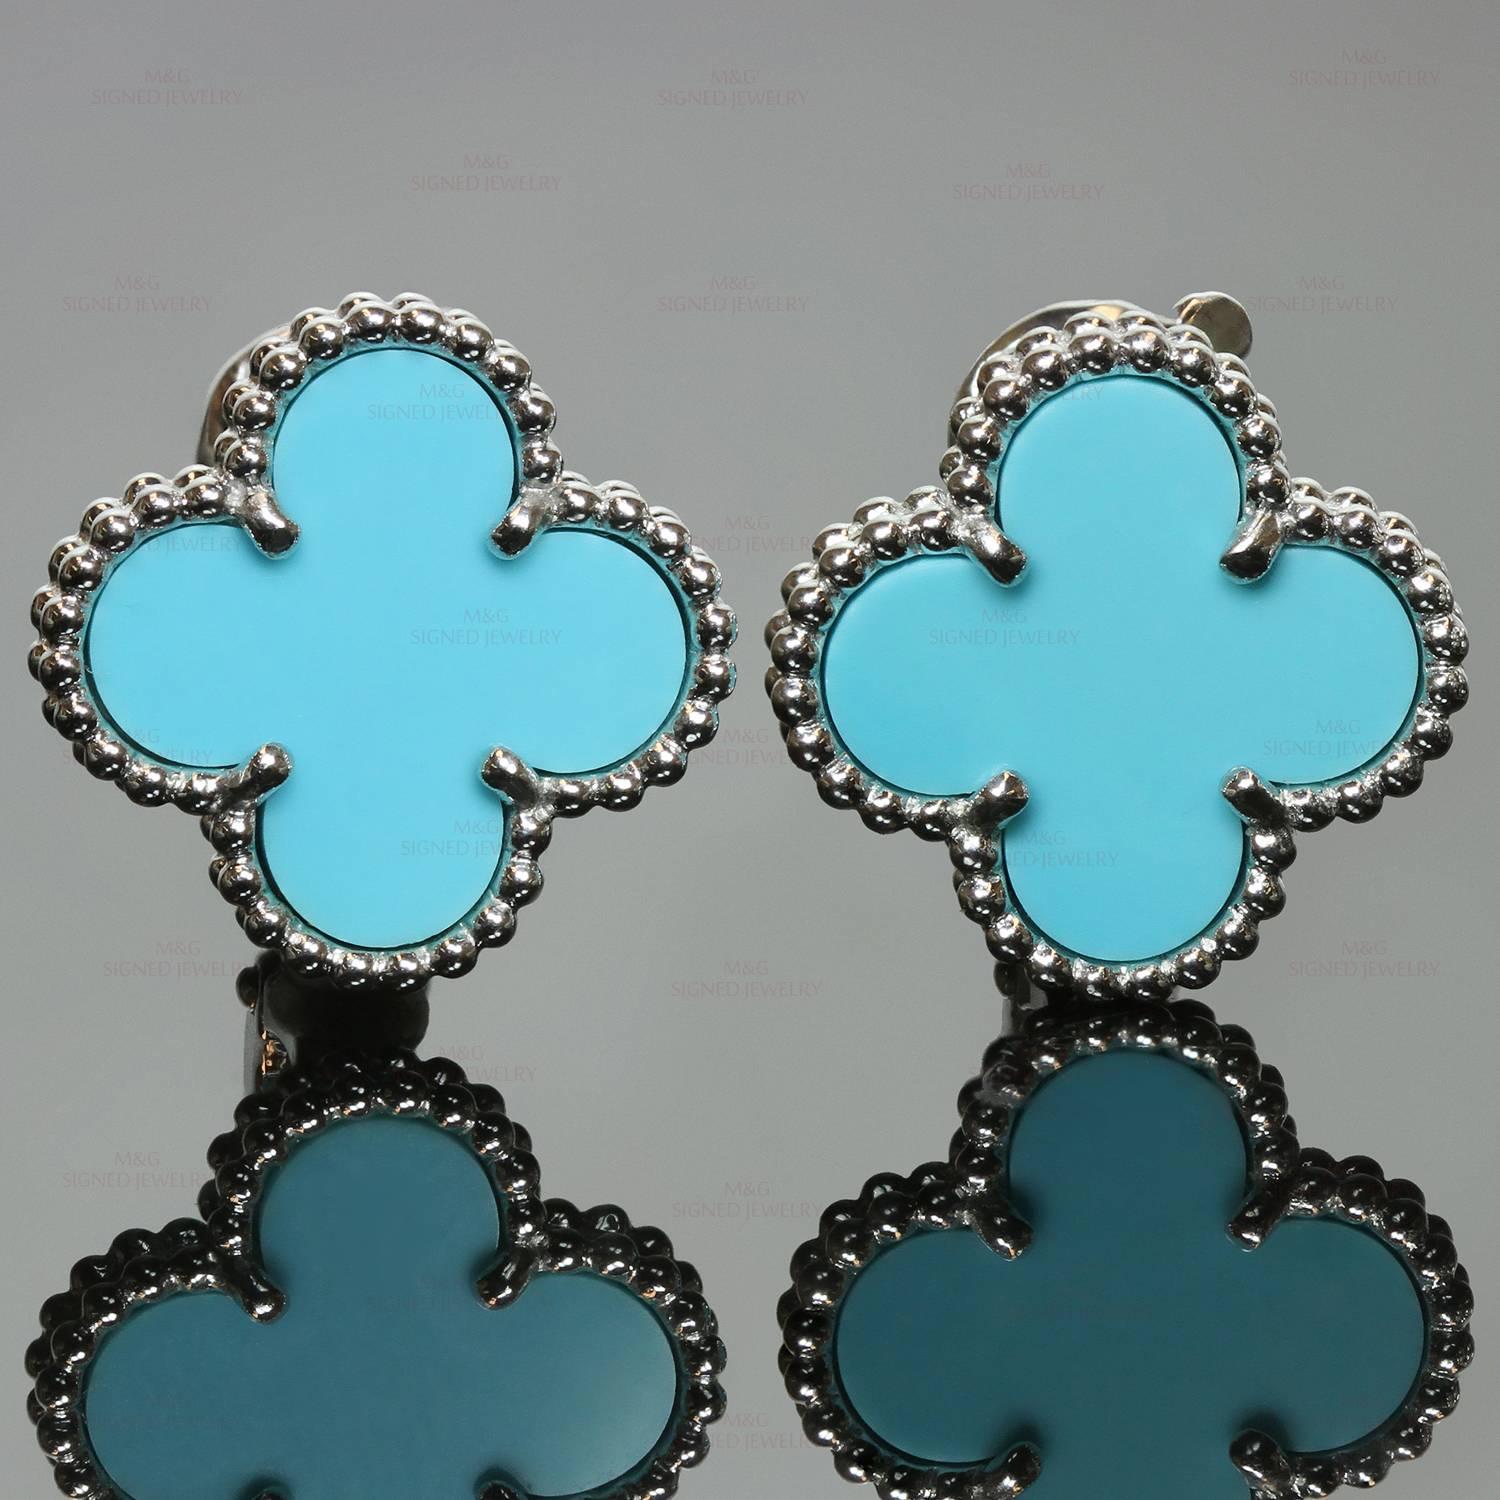 These stunning Van Cleef & Arpels lever-back earrings from the vintage Alhambra collection feature the lucky clover design crafted in 18k white gold and set with blue turquoise. Made in France circa 2015. Measurements: 0.59" (15mm) width.